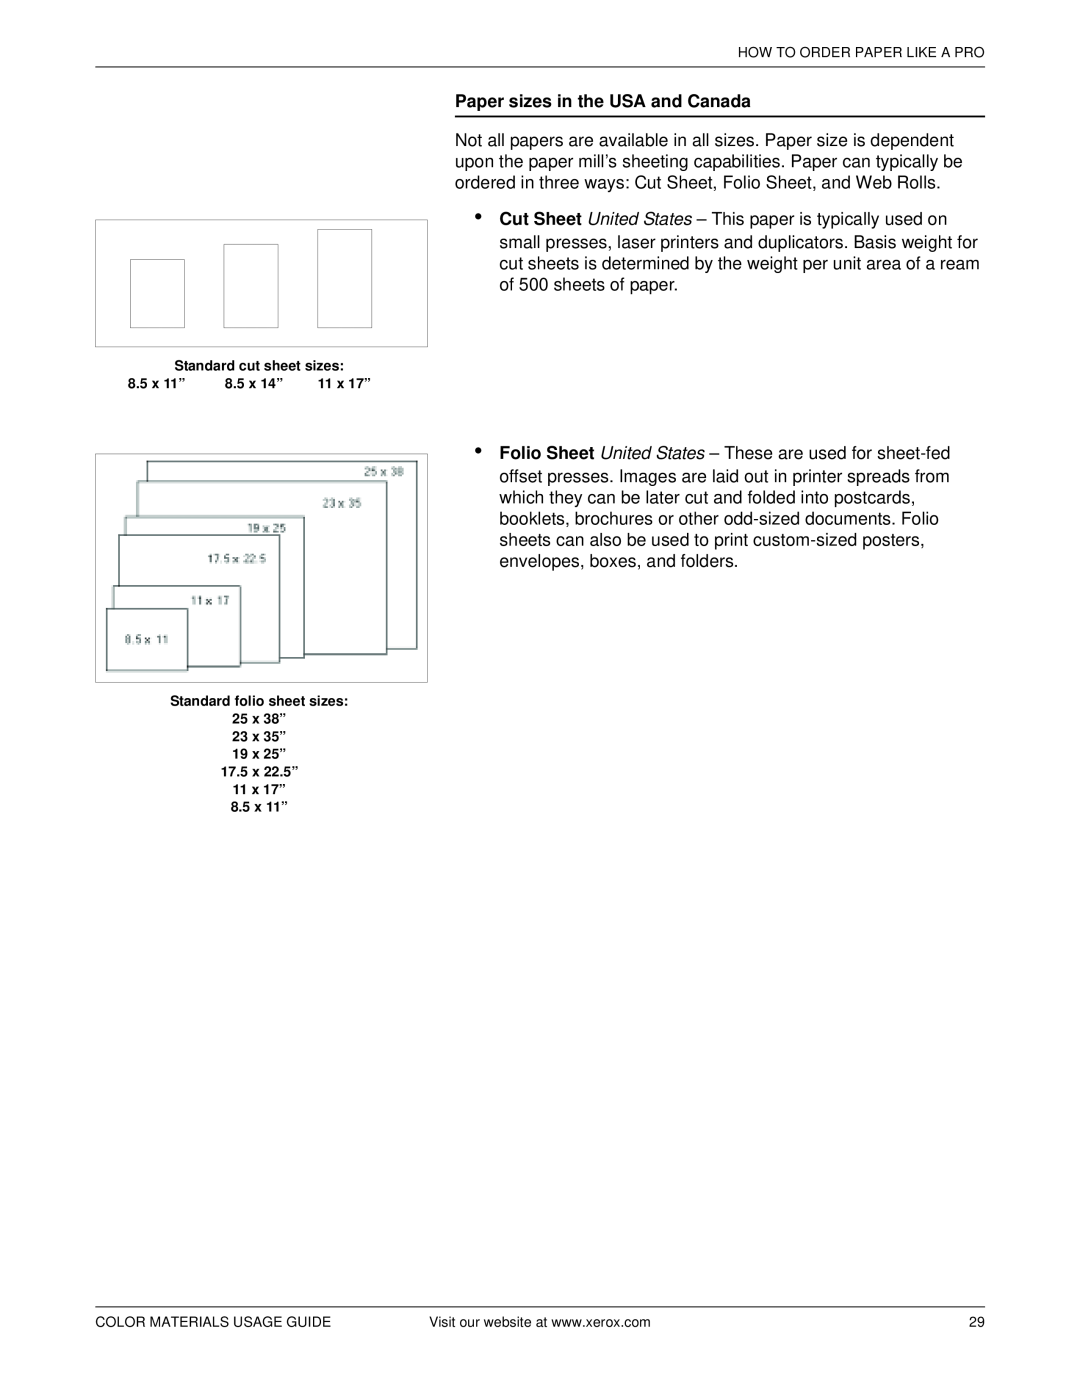 Xerox 12 manual Paper sizes in the USA and Canada, Standard cut sheet sizes, 8.5 x 11”, 8.5 x 14”, 11 x 17” 